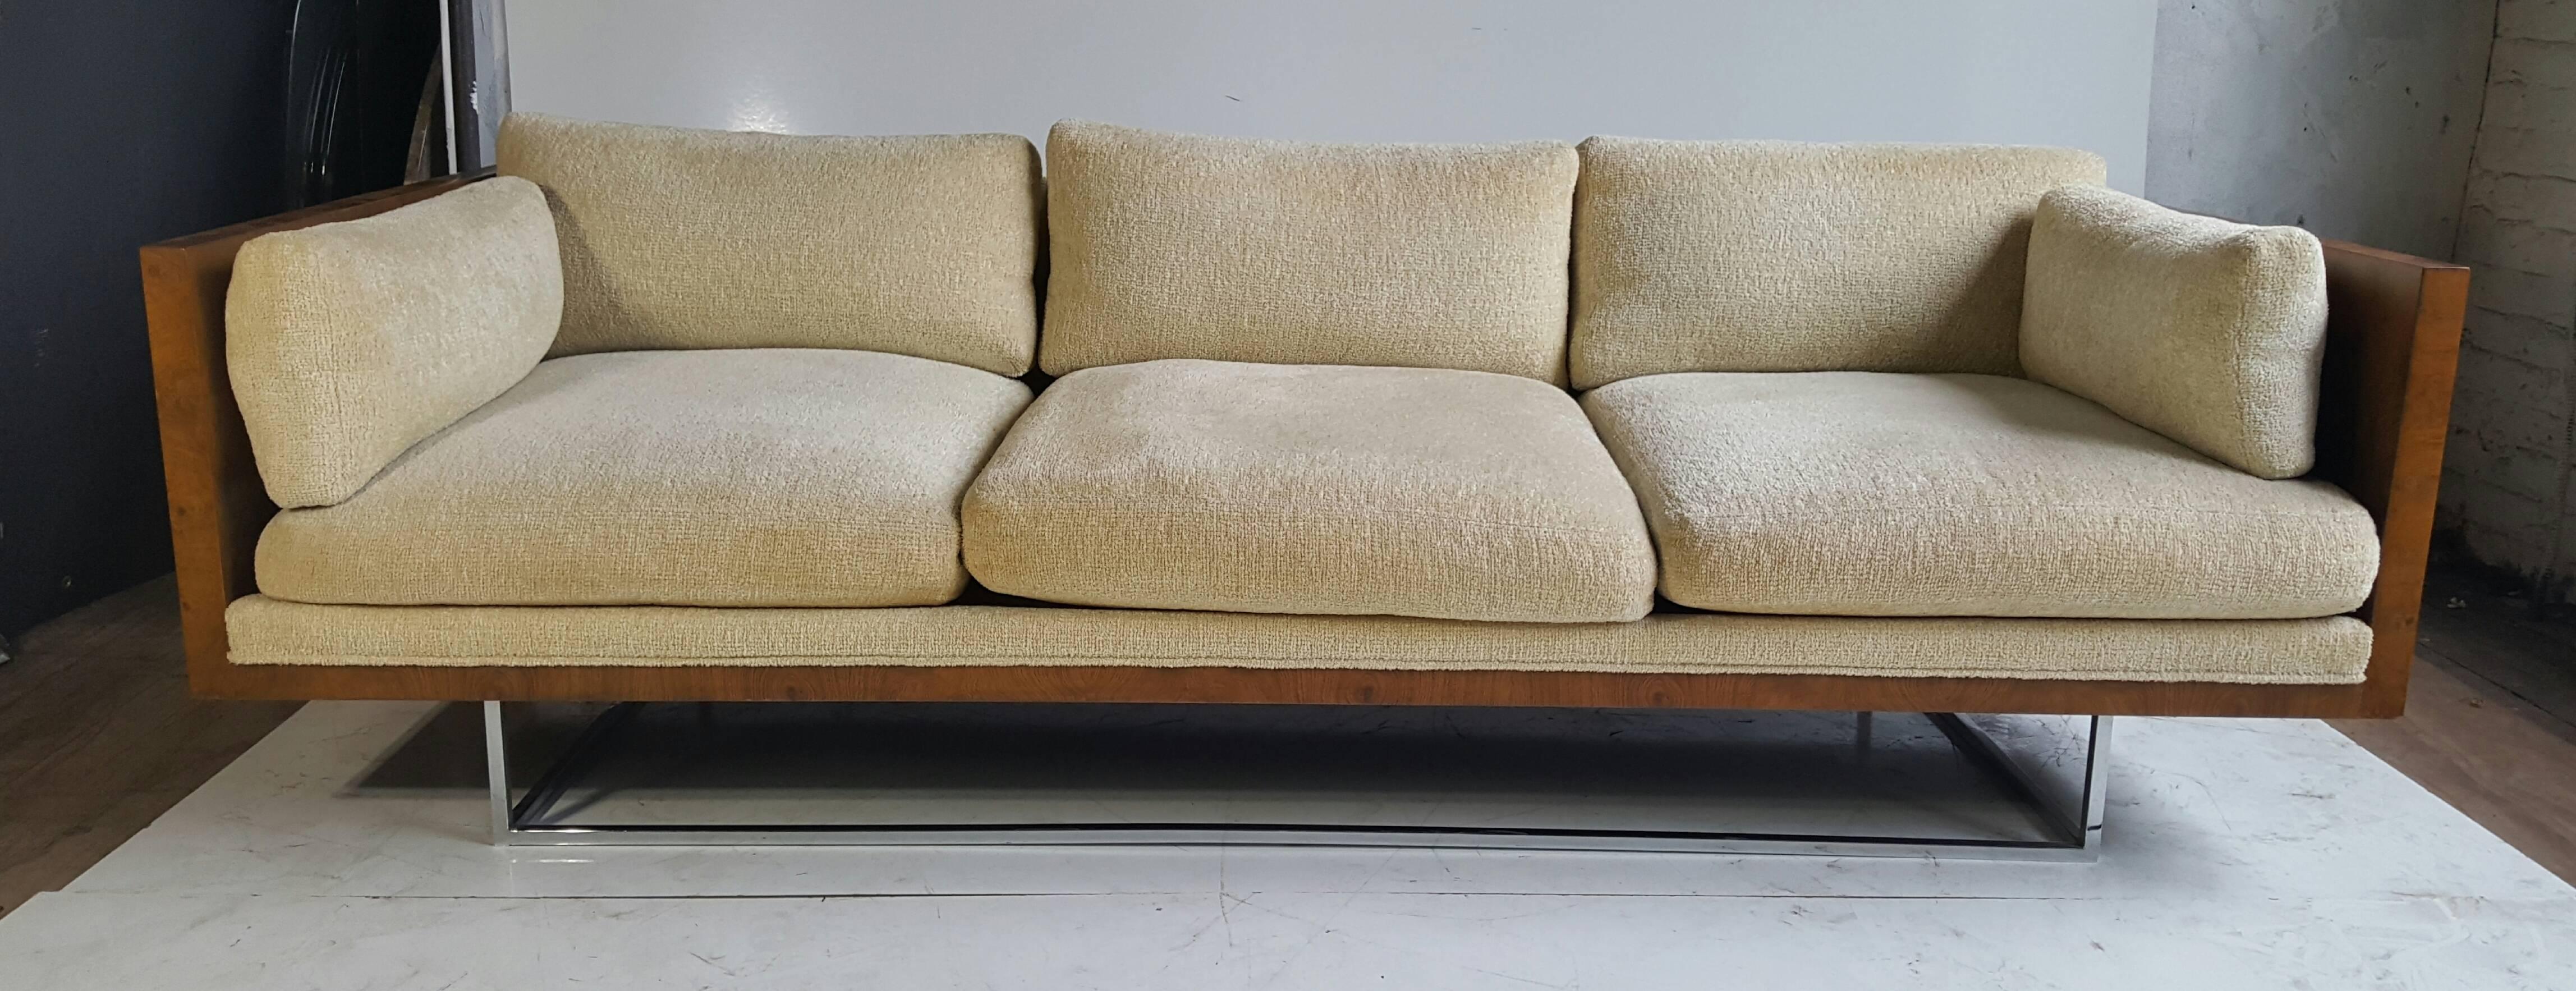 Stunning Milo Baughman Floating Burl and Chrome Tuxedo (case)Sofa,,, In my opinion,,one of Milo's best design,, Classic even arm, burl wood, 3 seat sofa,, Wonderful book matched grain,,Retains original off white fabric,,minor fading and